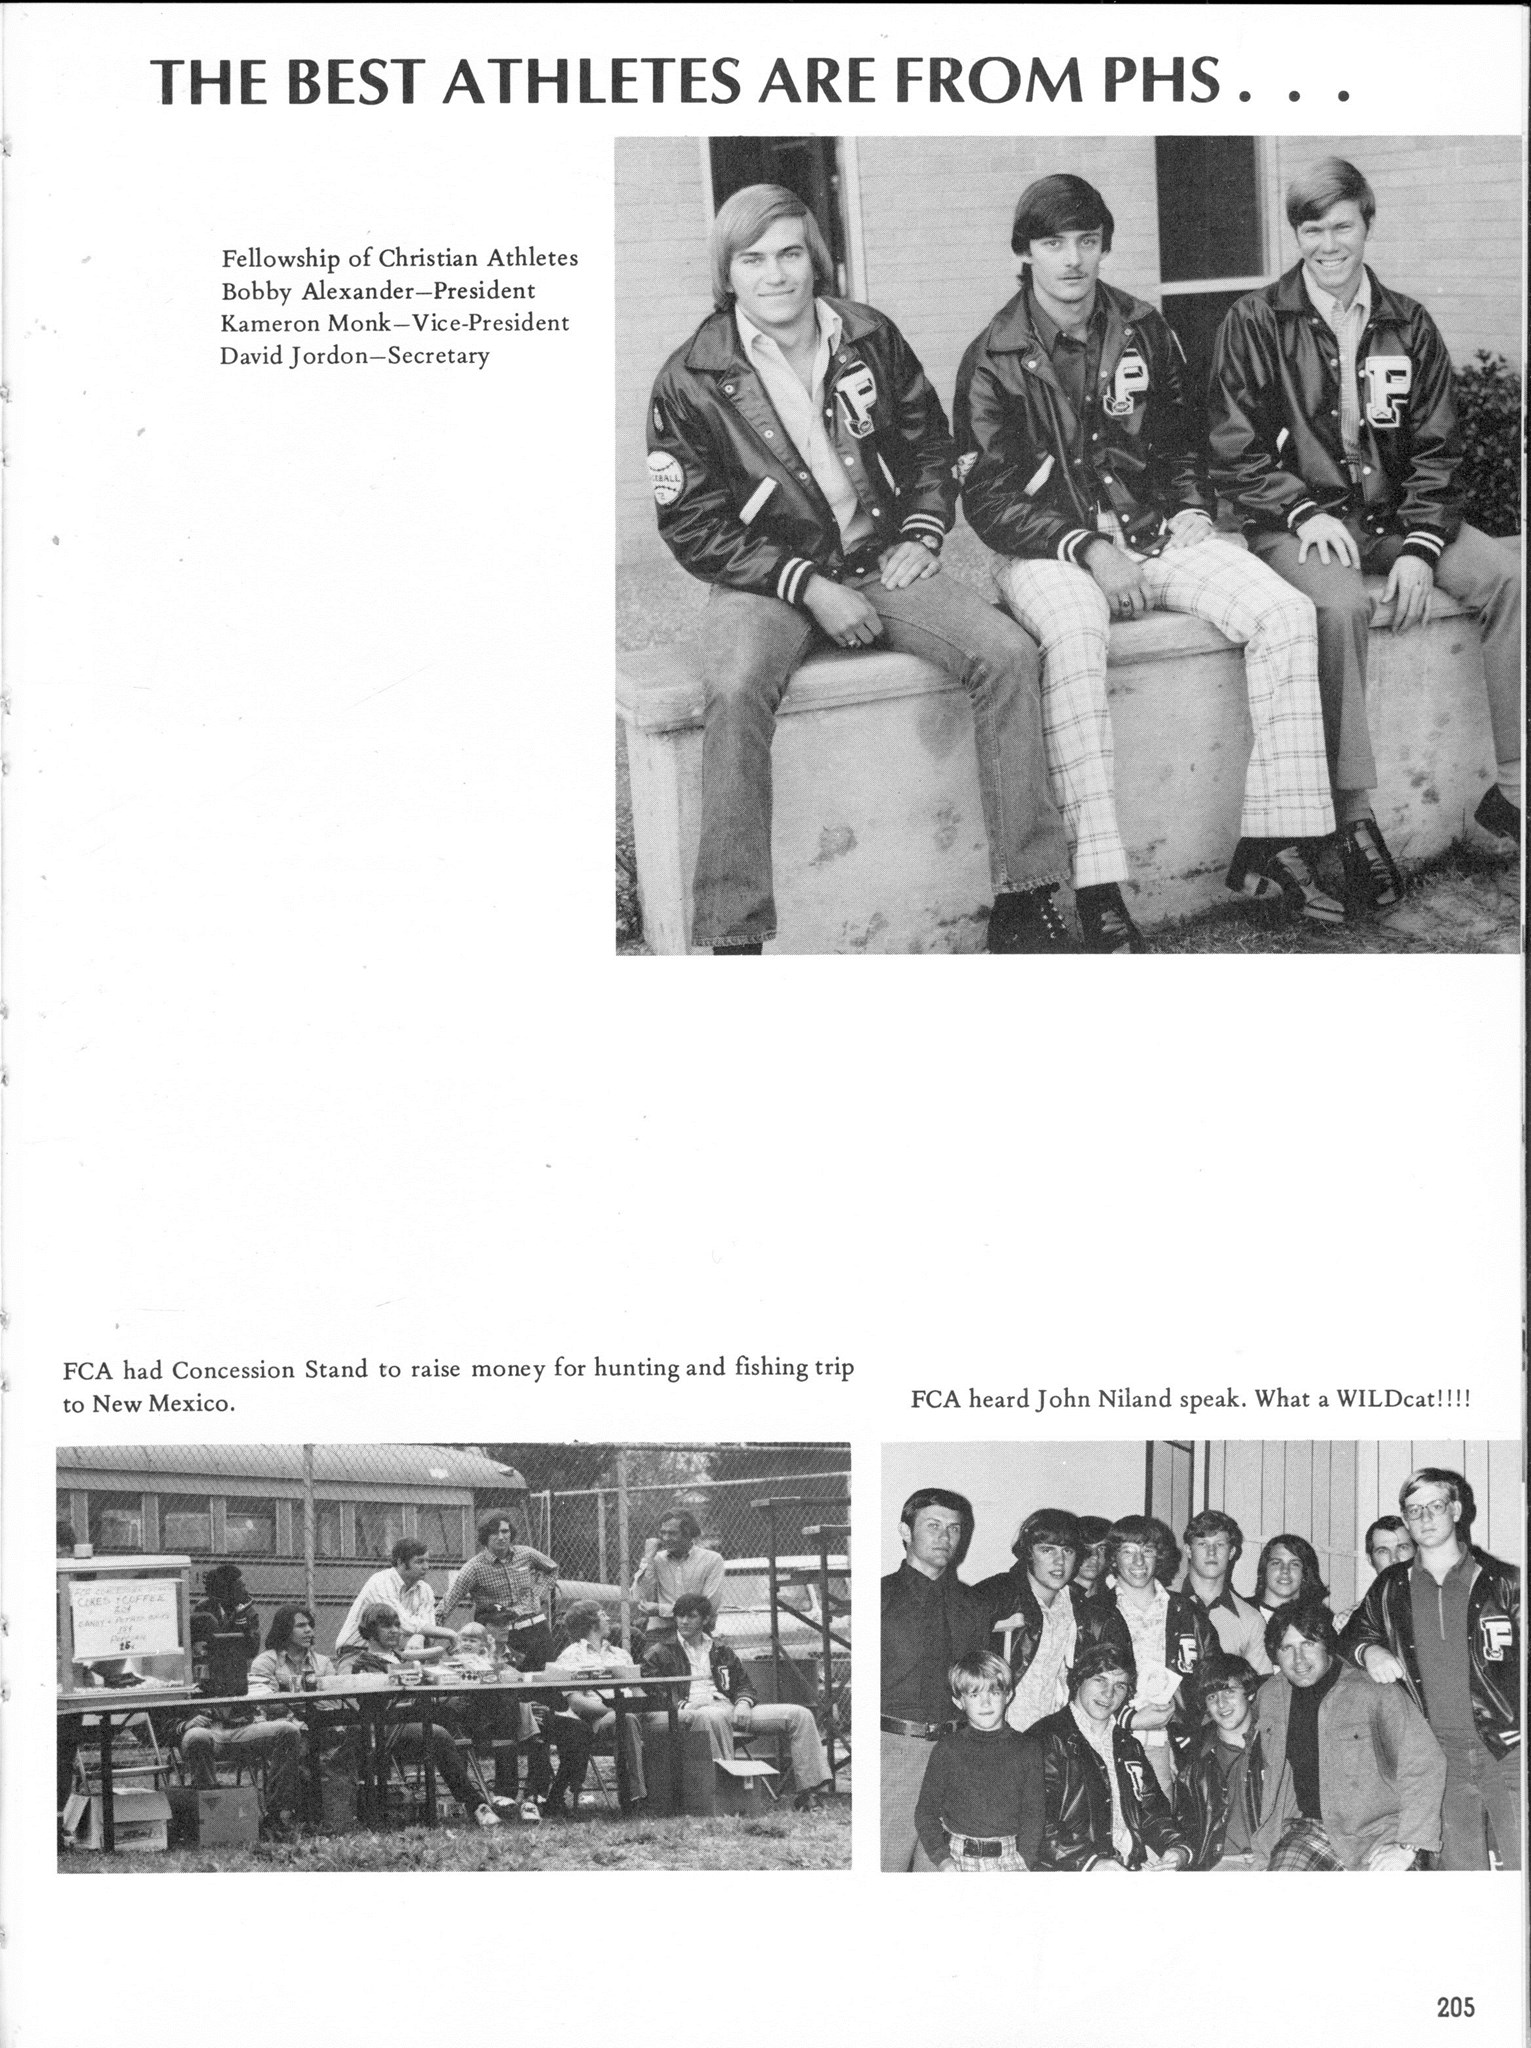 ../../../Images/Large/1974/Arclight-1974-pg0205.jpg